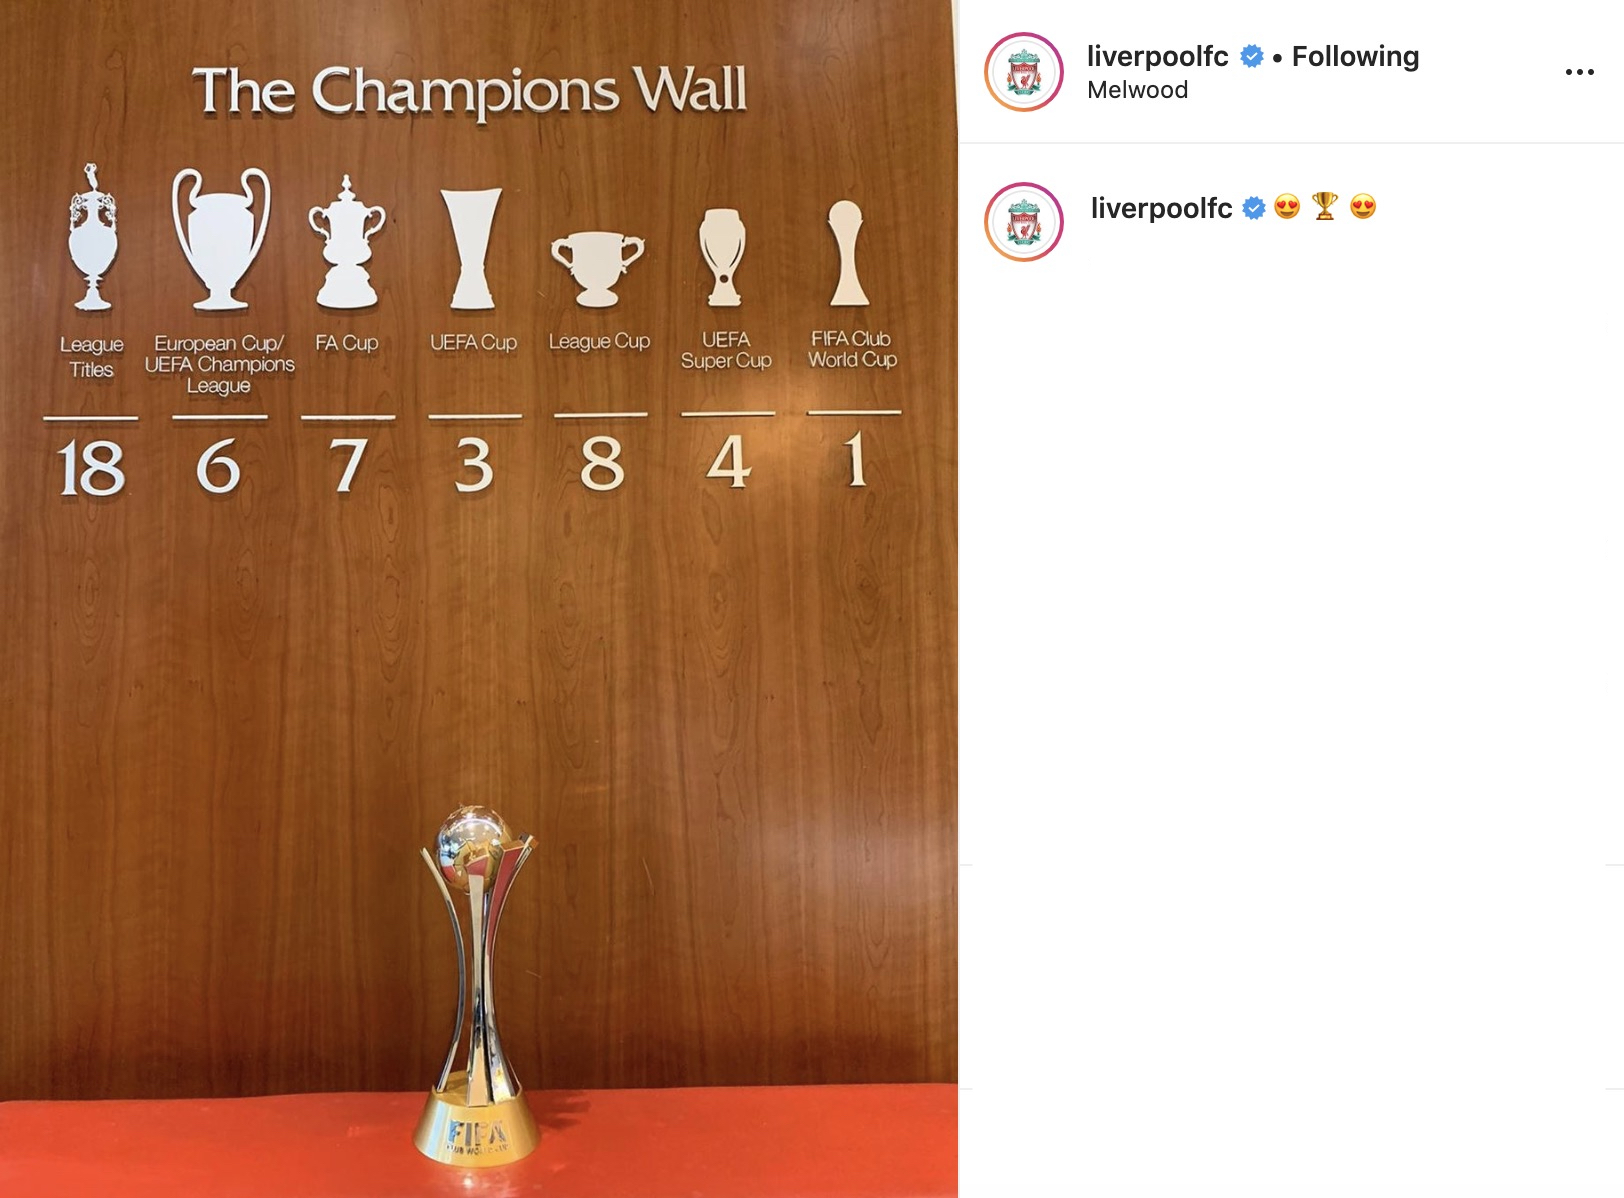 This Is on Twitter: "😍🏆 Liverpool's Wall has had another upgrade... (📷: @LFC Instagram) / X